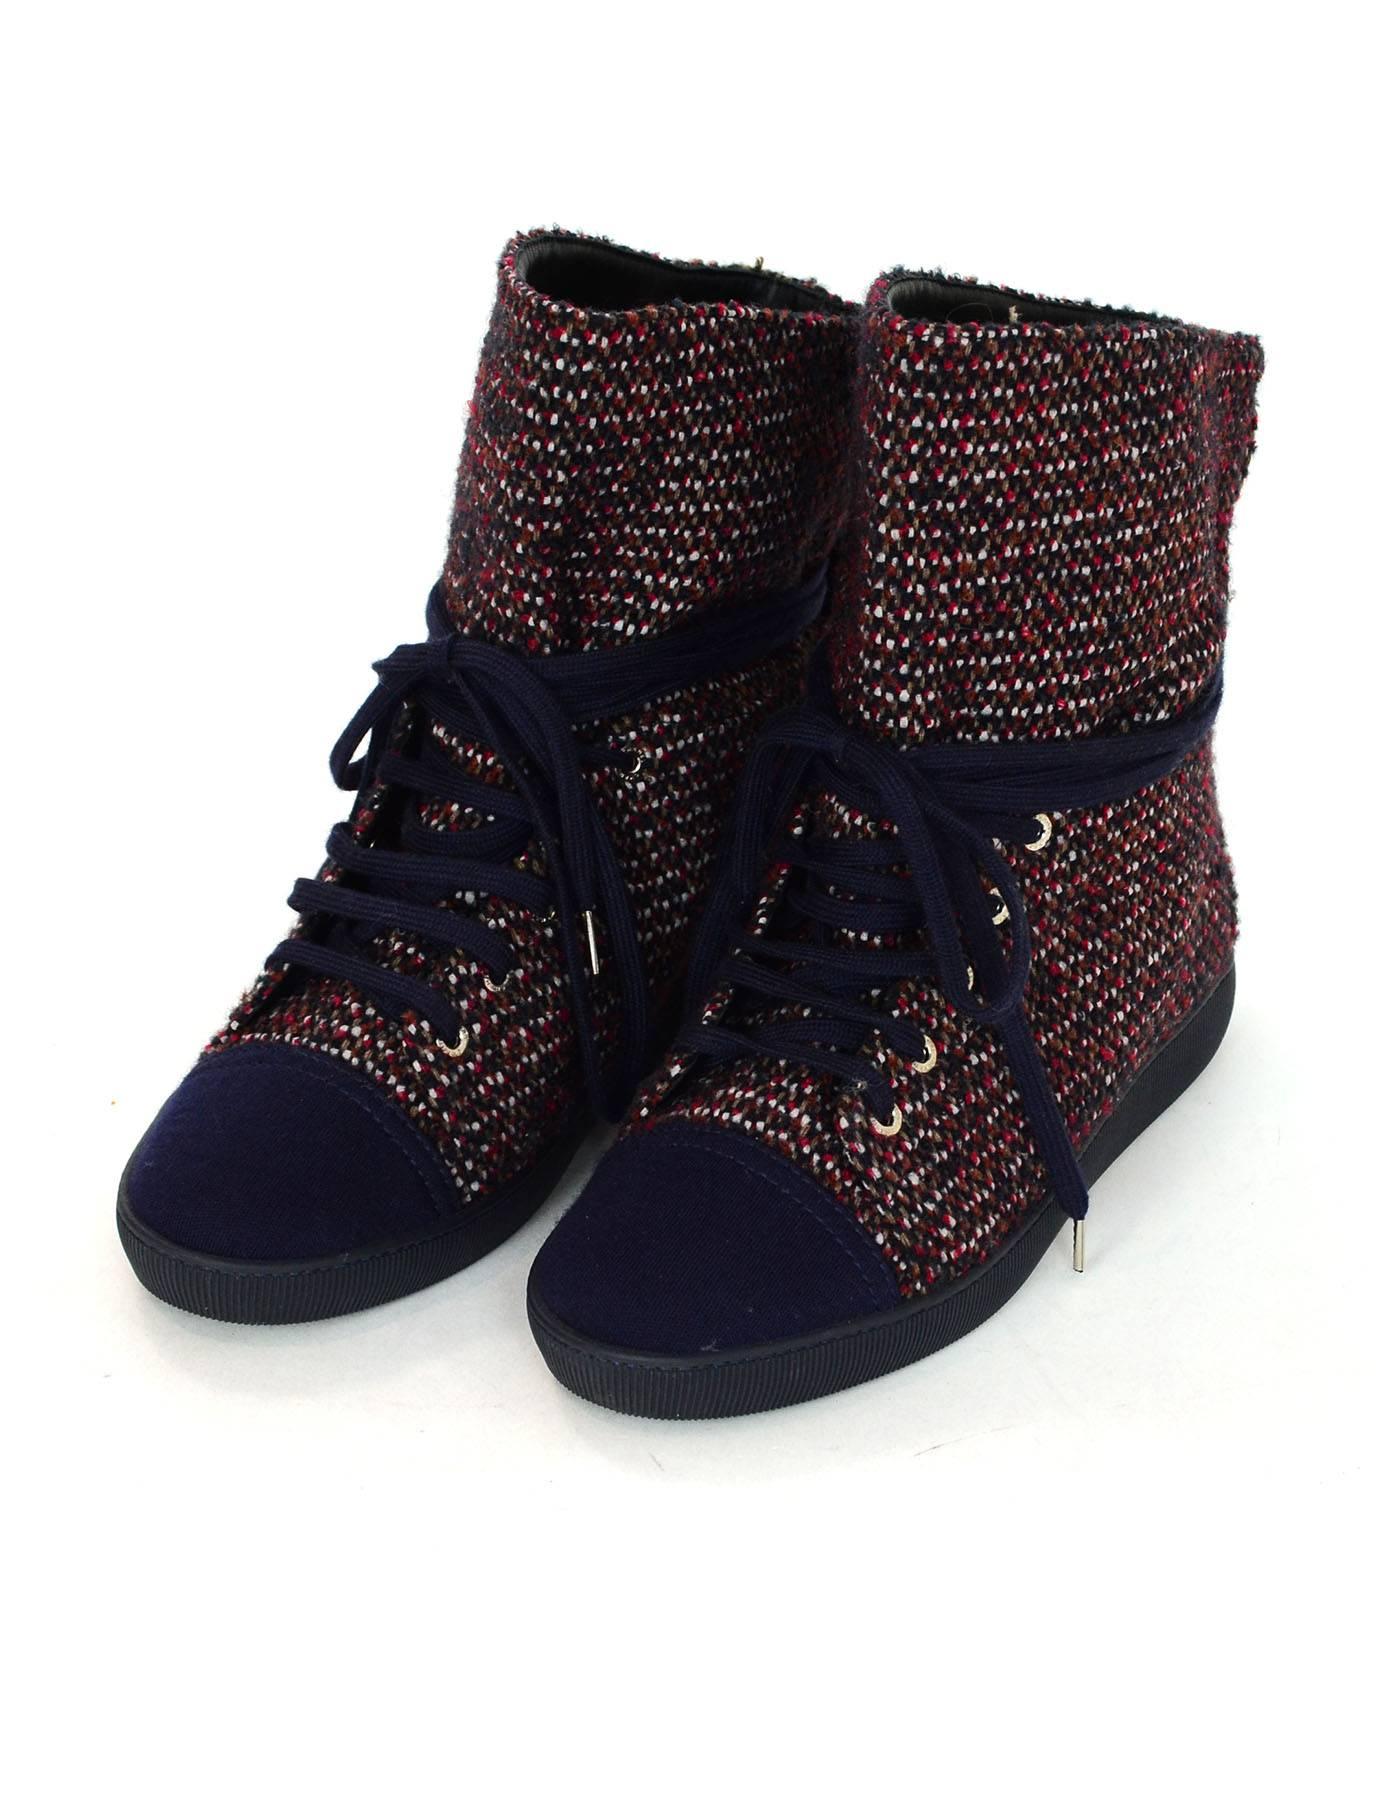 Chanel Red & Blue Tweed Cap-Toe Sneaker Boots Sz 38

Made In: Italy
Color: Red, blue
Materials: Tweed, leather, rubber
Closure/Opening: Lace tie closure
Sole Stamp: Chanel made in Italy
Overall Condition: Excellent pre-owned condition with the